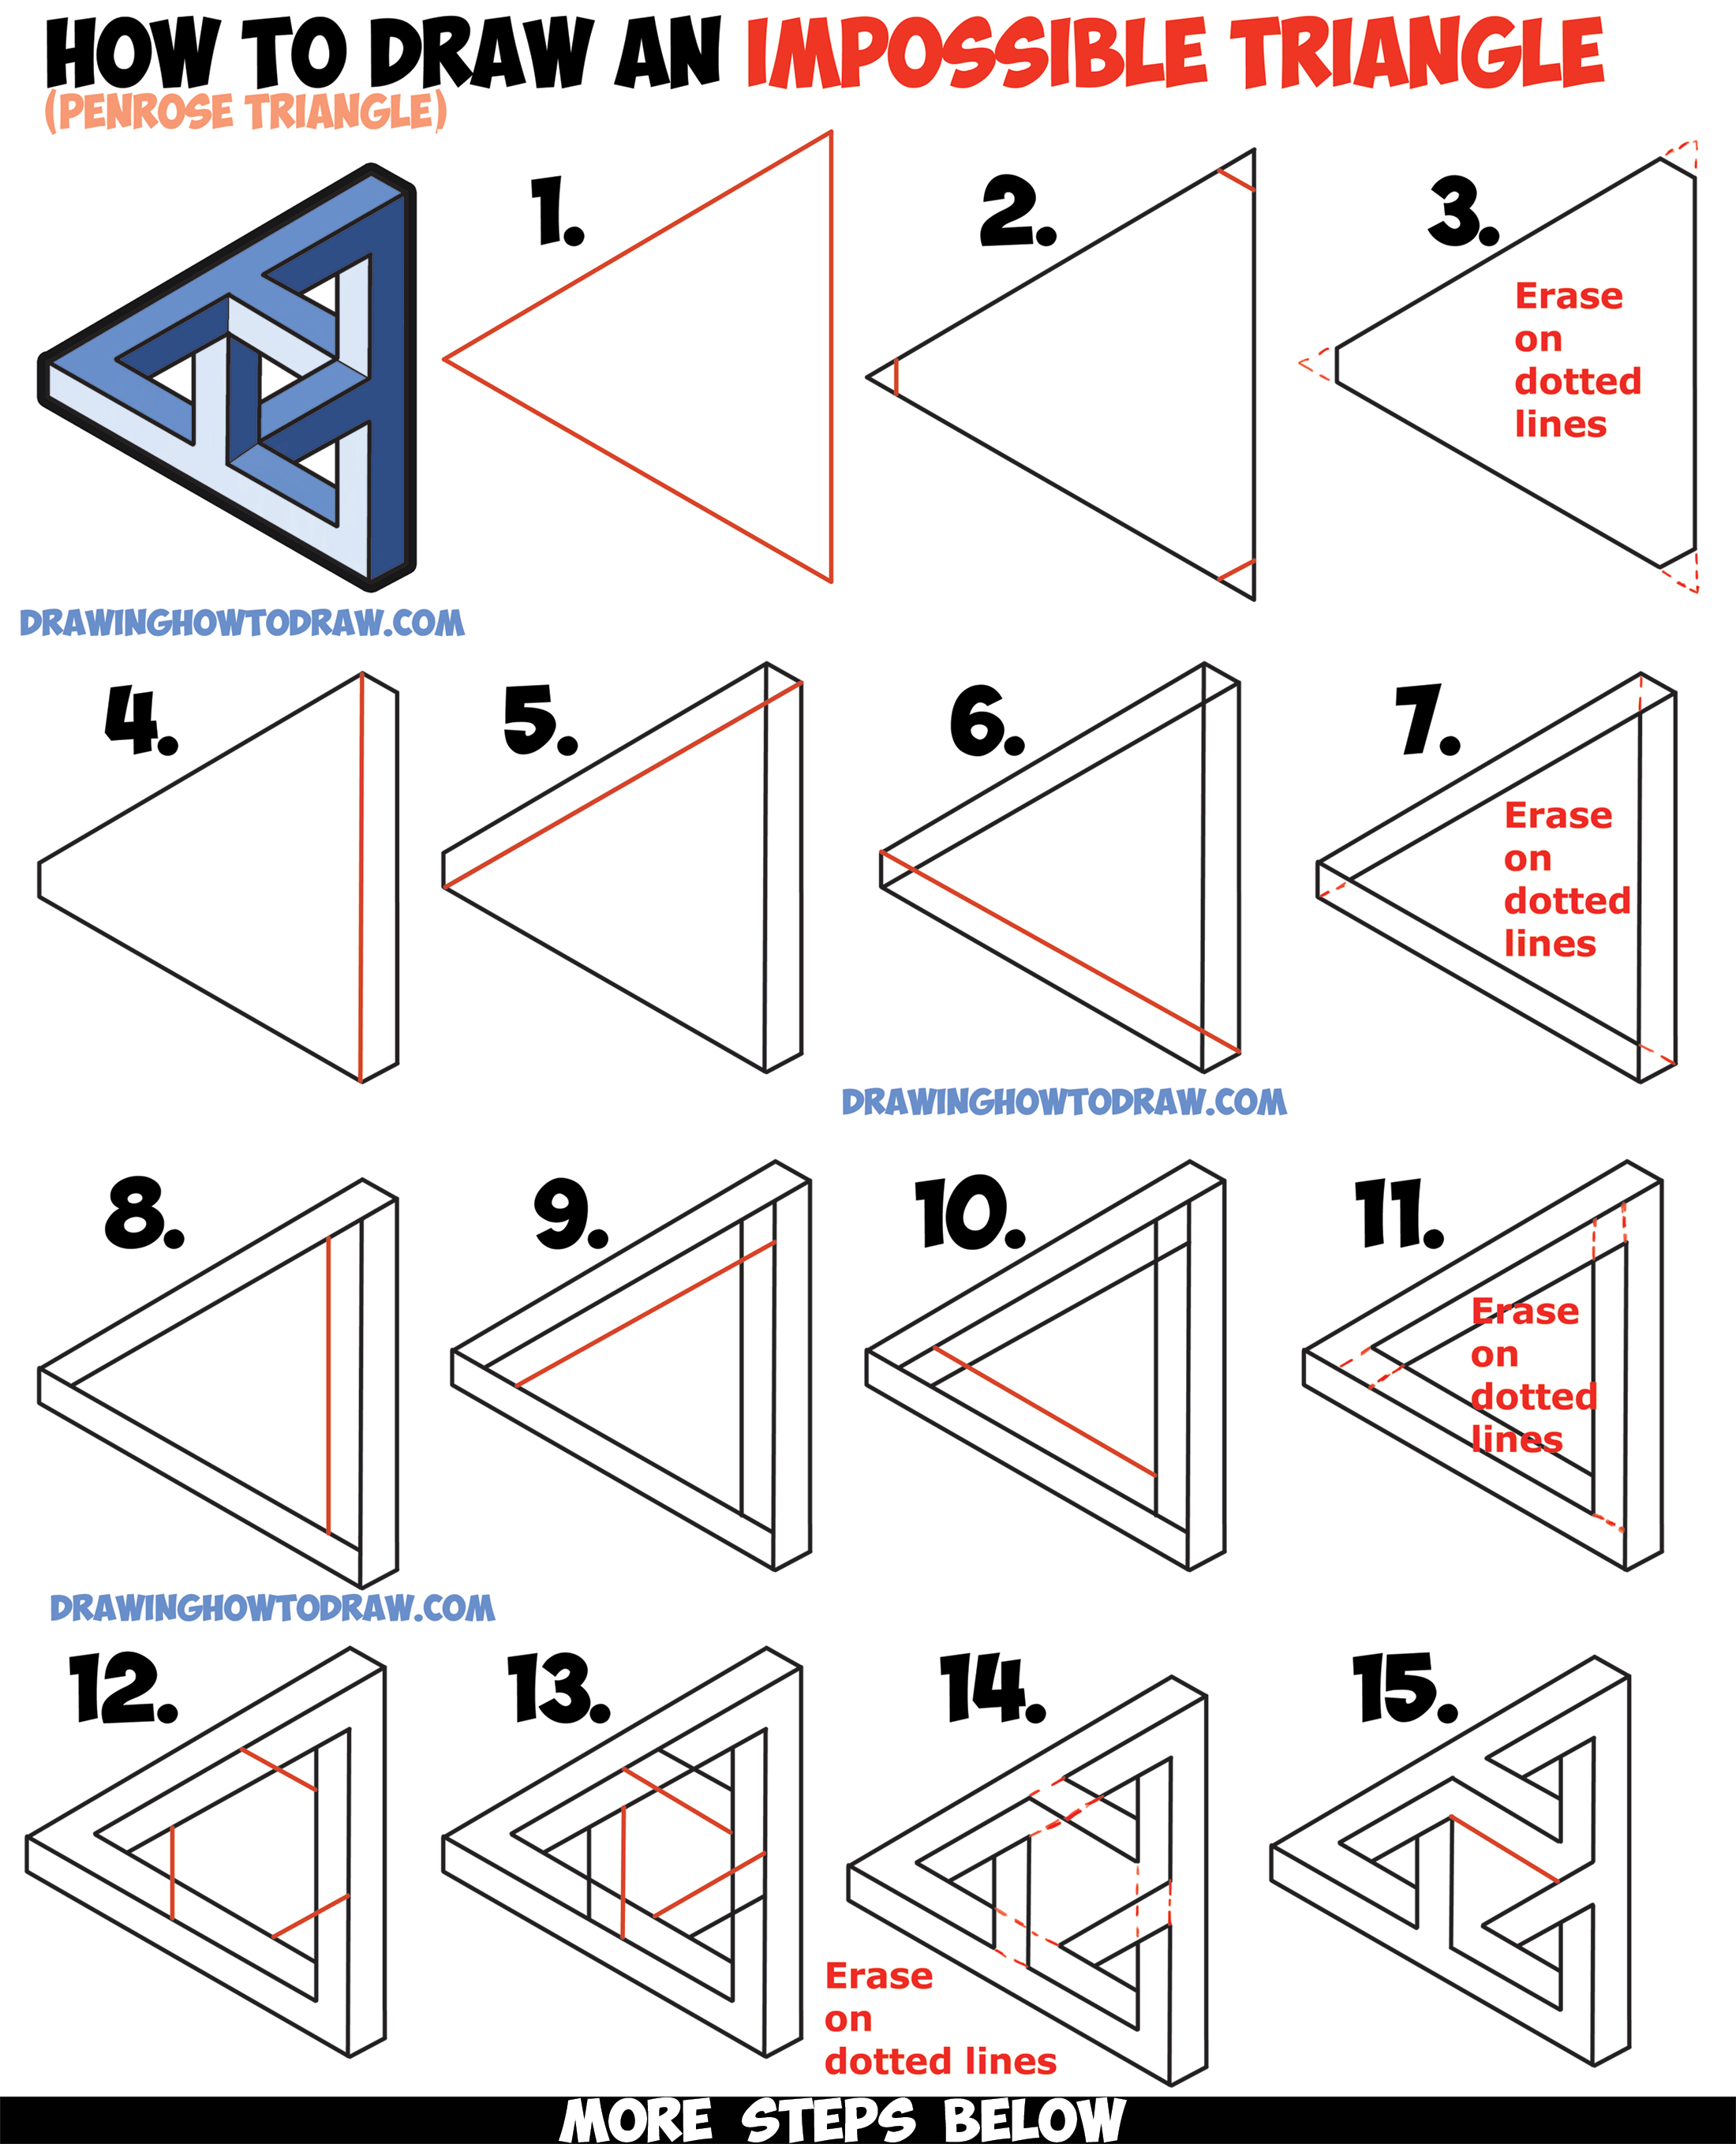 How to Draw an Impossible Triangle (Penrose Triangle) That Looks Woven ...